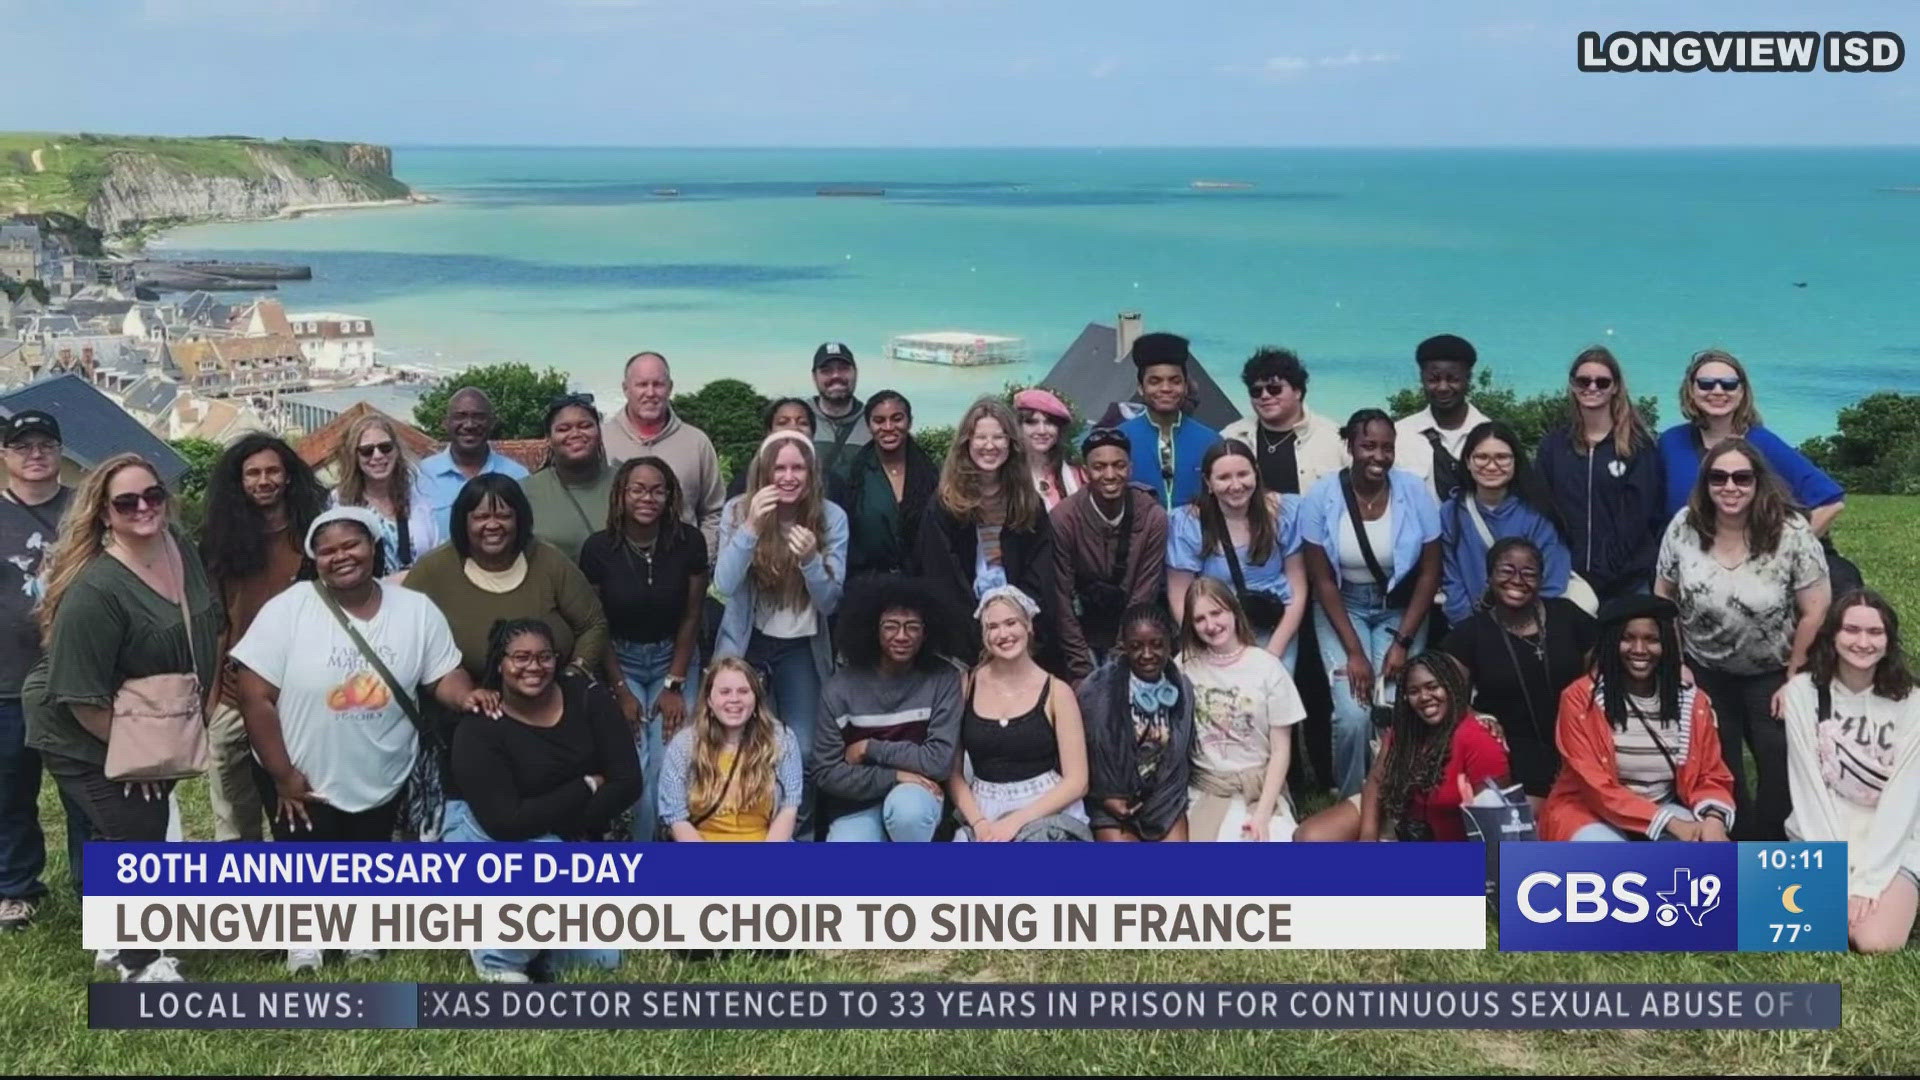 Longview High School choir travels to France to sing for 80th anniversary of D-Day